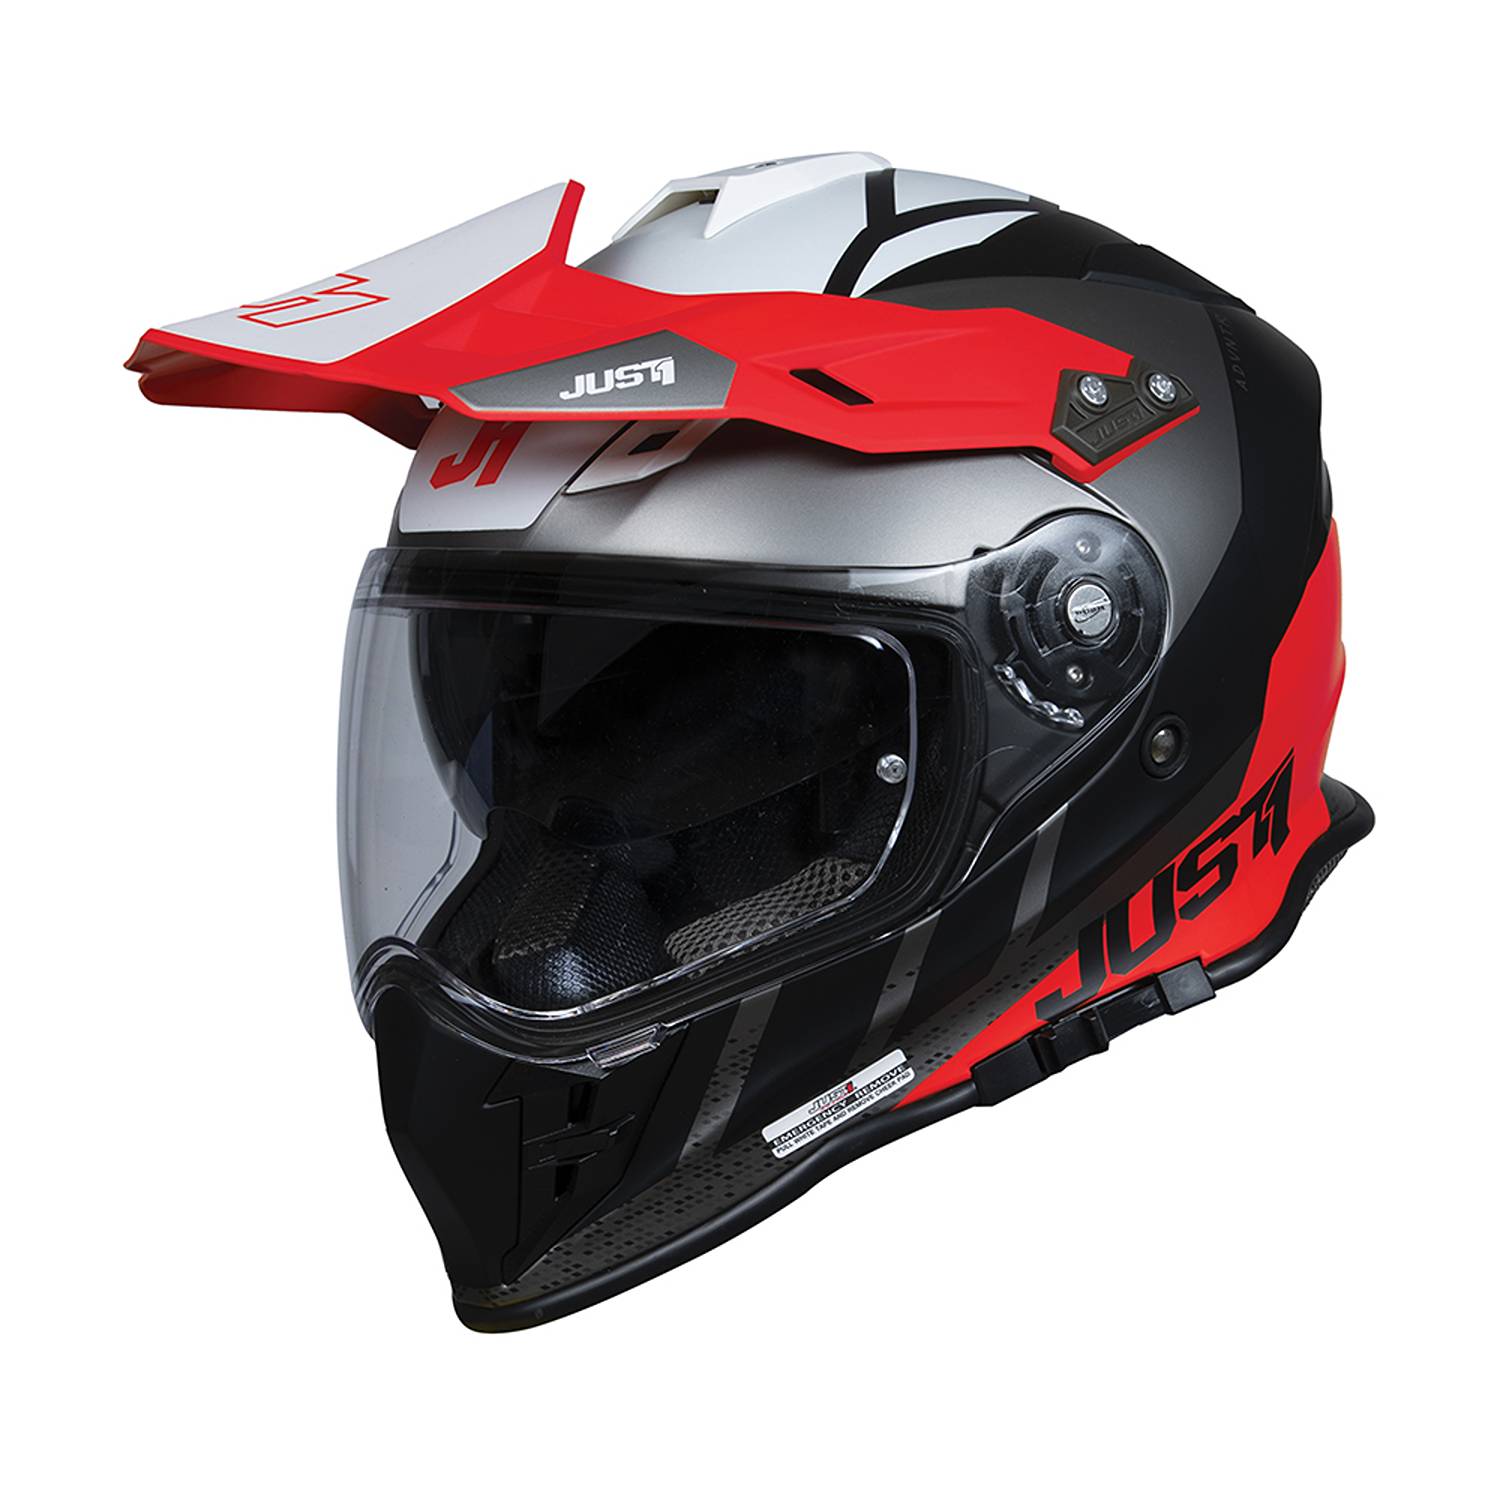 Image of EU Just1 J34 Pro Outerspace Noir Rouge Blanc Aventure Casques Taille S